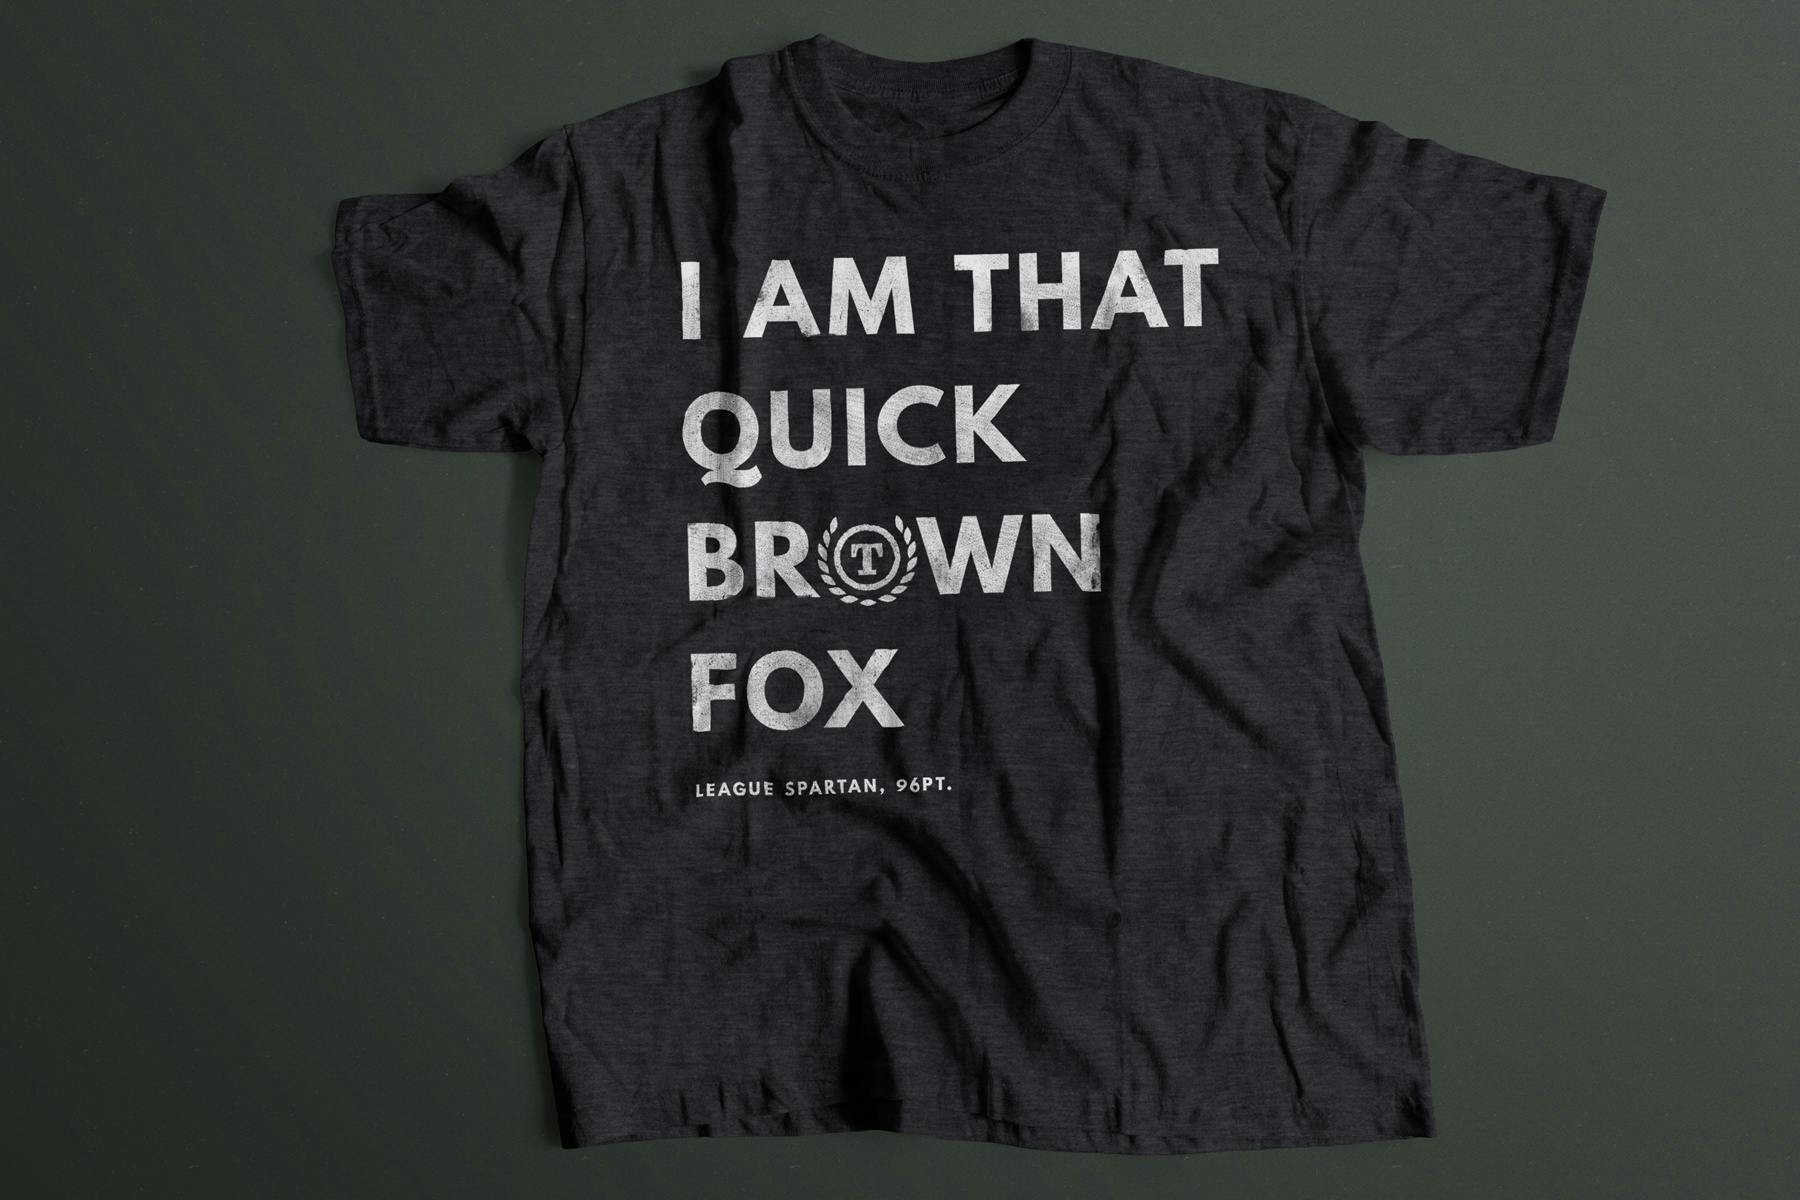 The Quick Brown Fox Tee was just one of the many pieces of merch over the years, designed & sold exclusively to our audience.